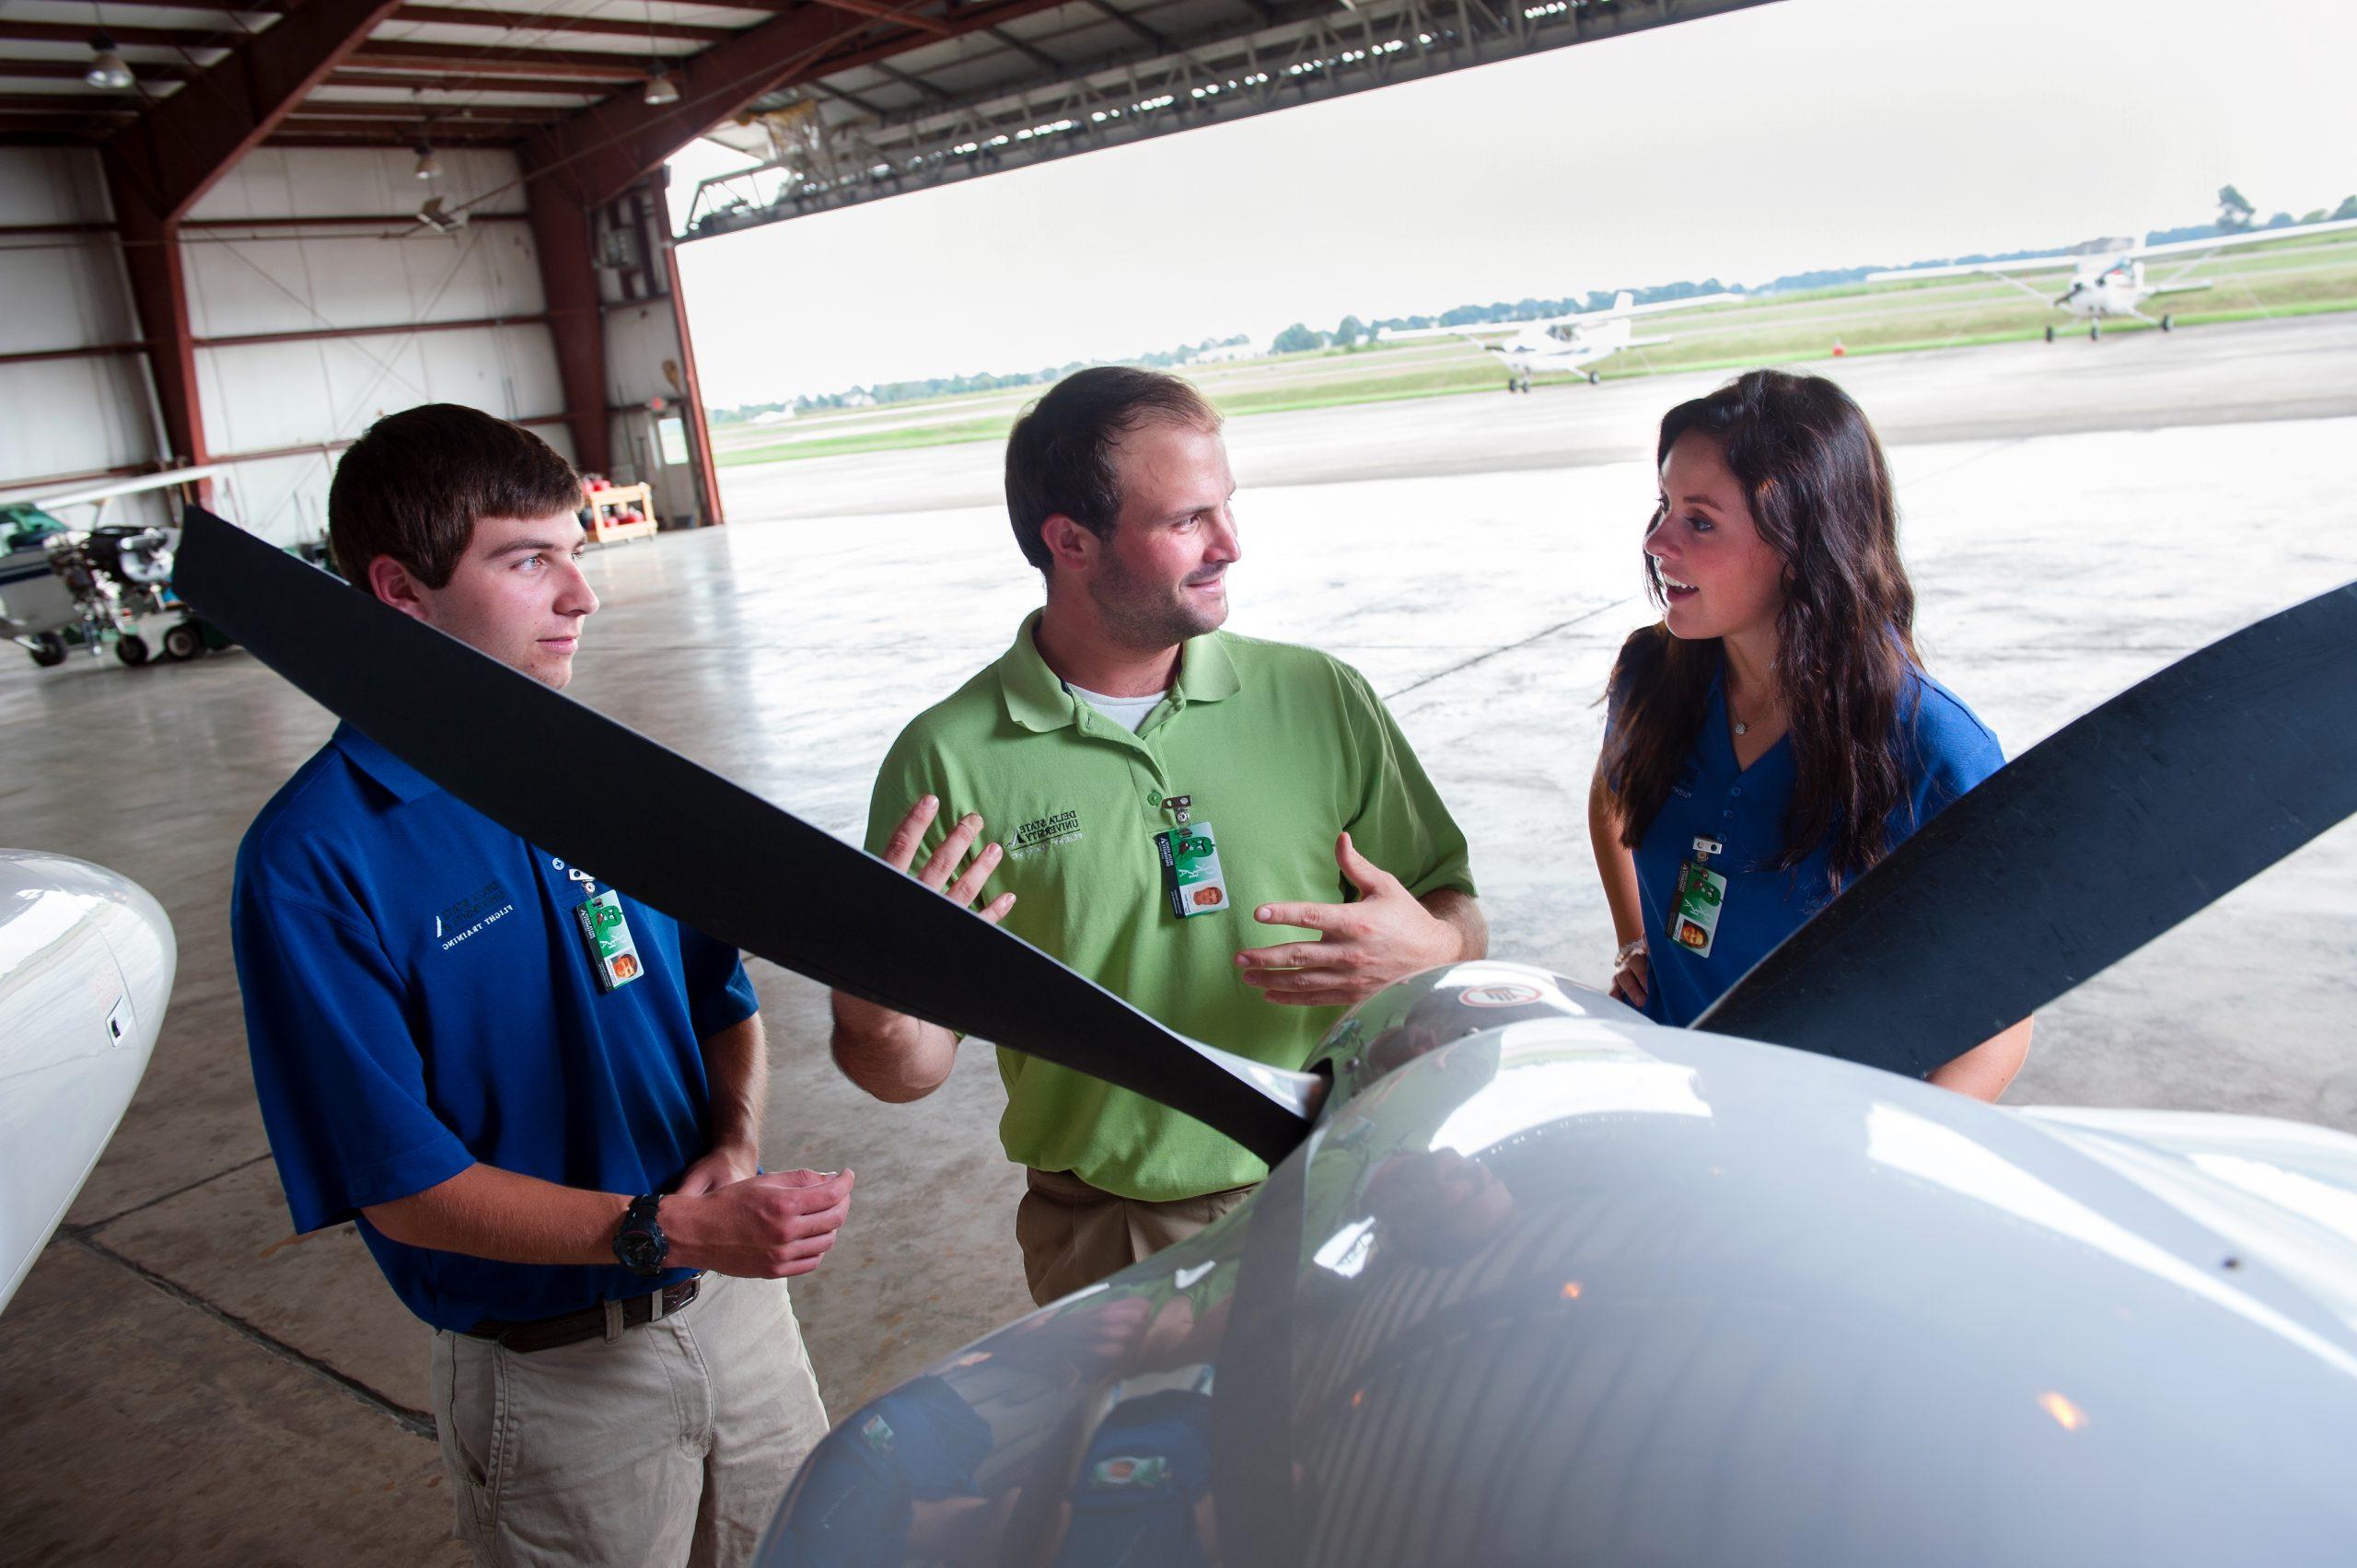 Instructor with two students standing in front of an plane in the airport hanger.